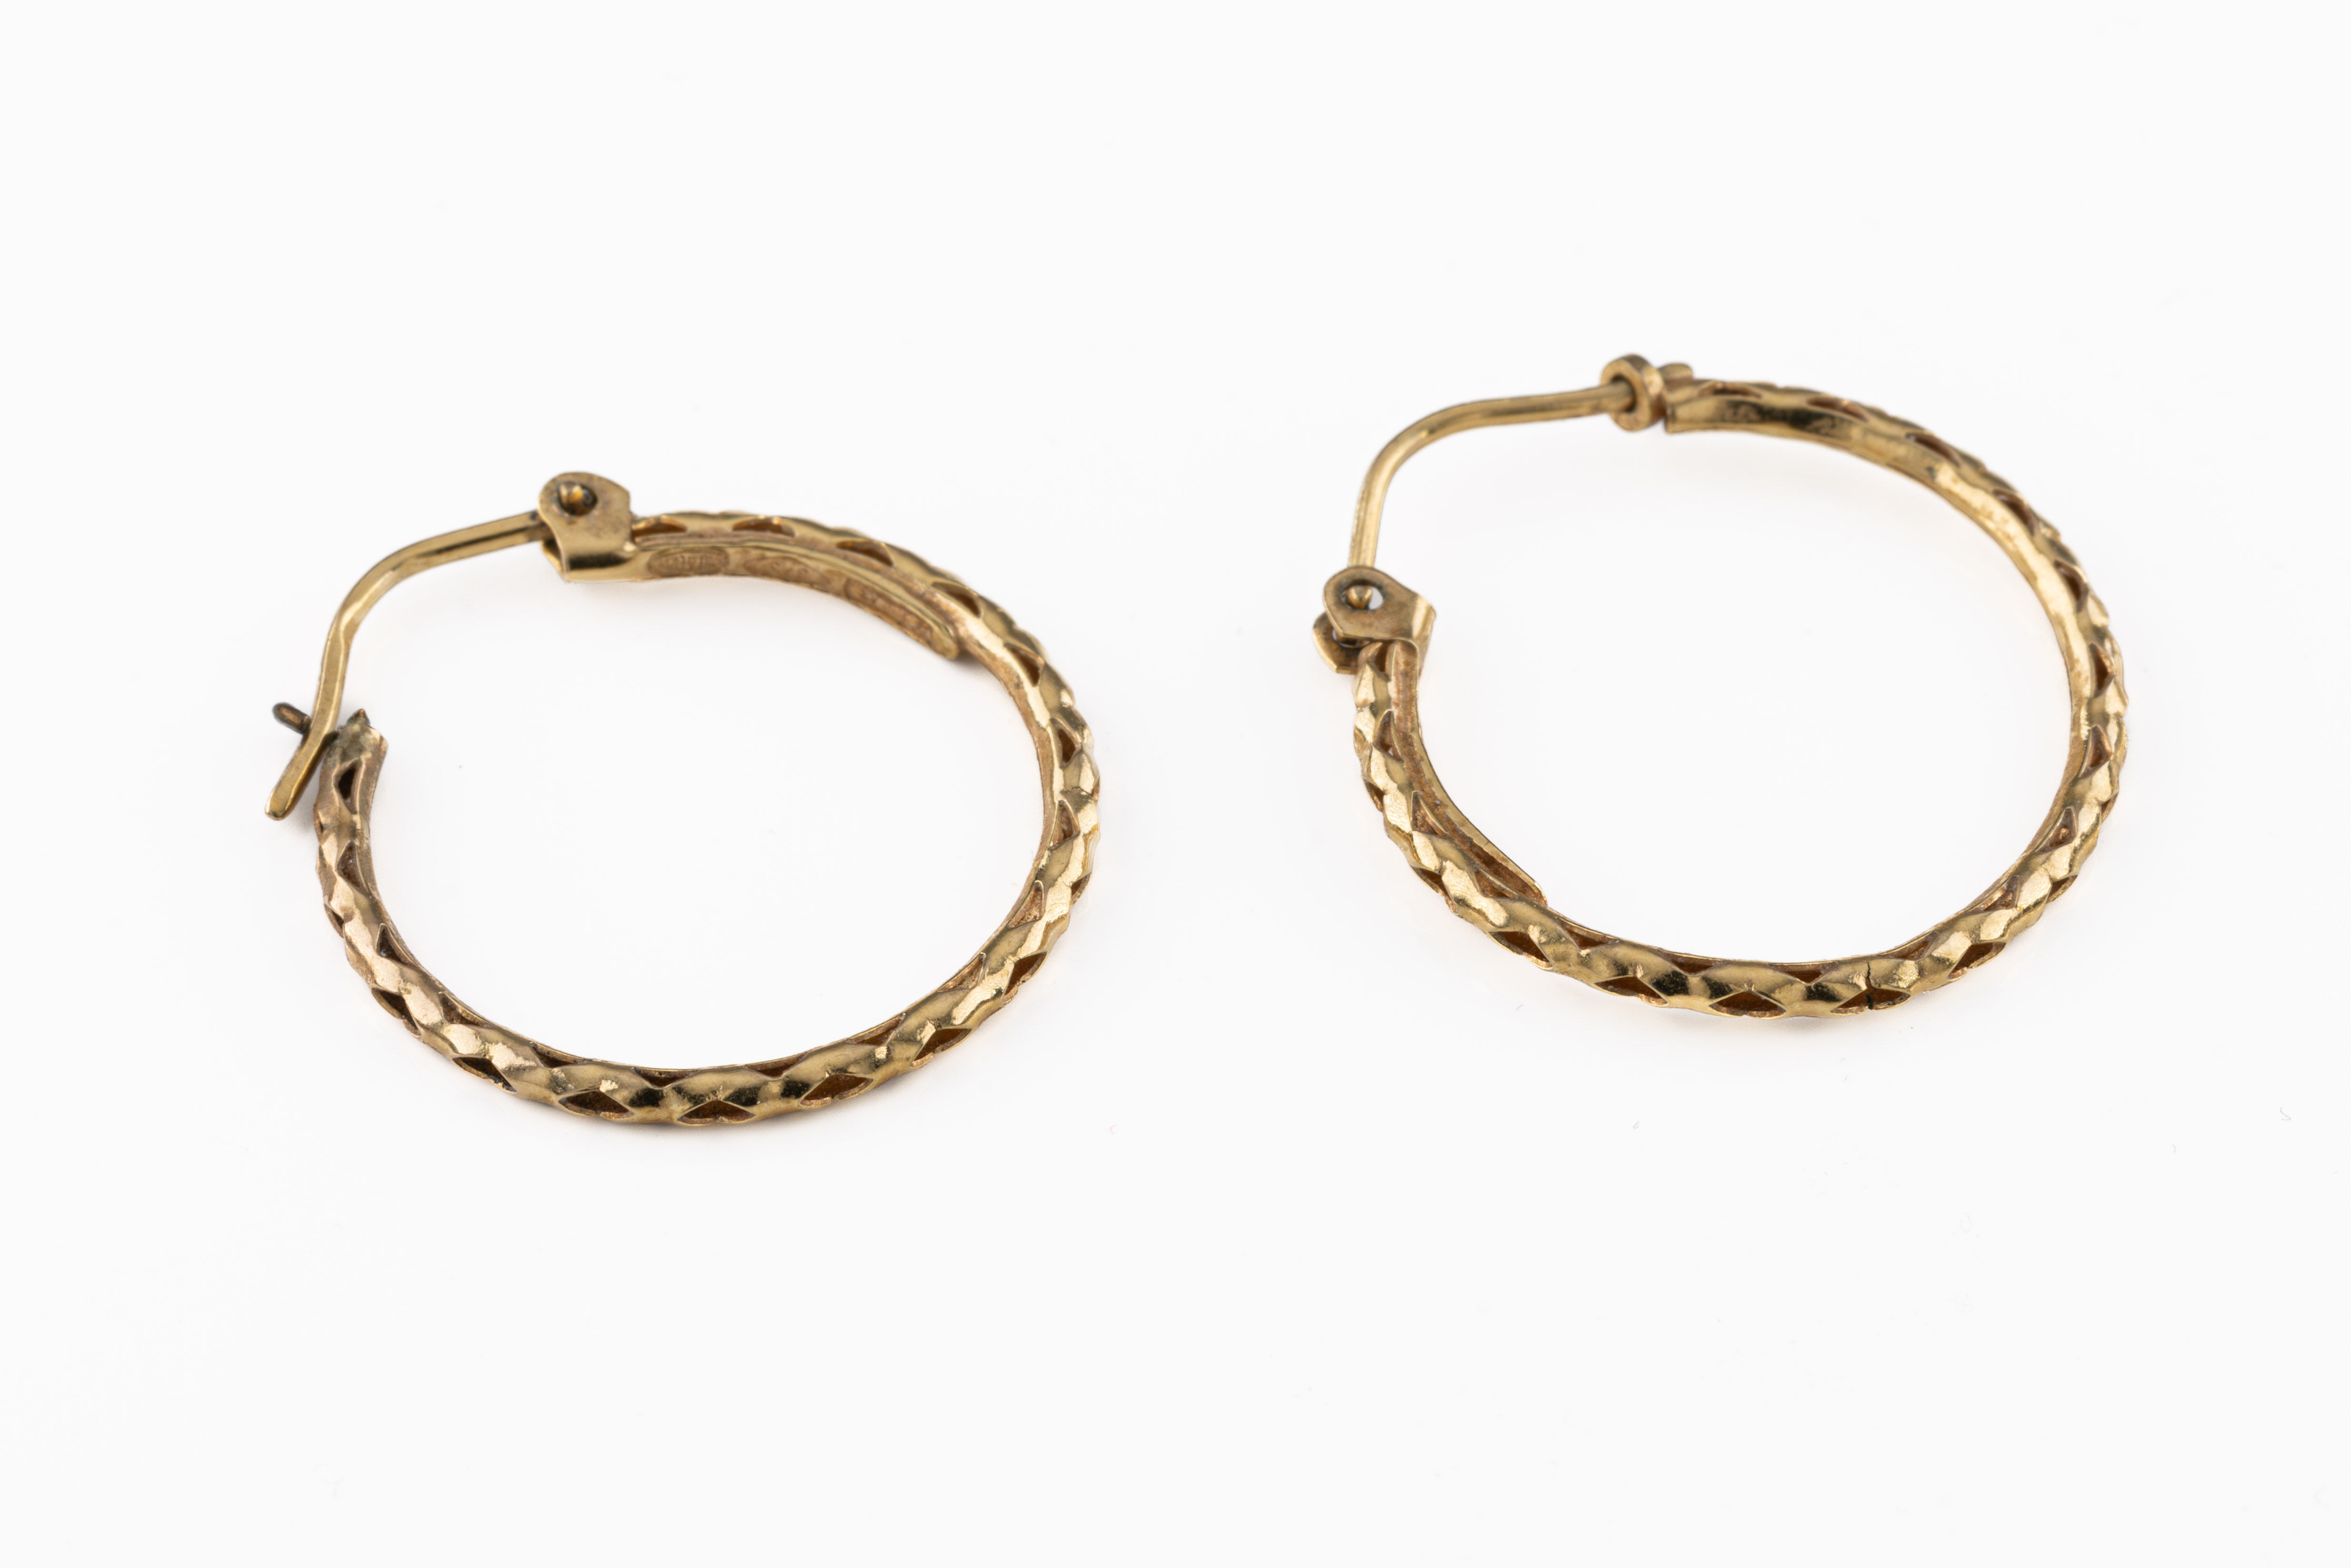 A pair of 9ct yellow gold hoops